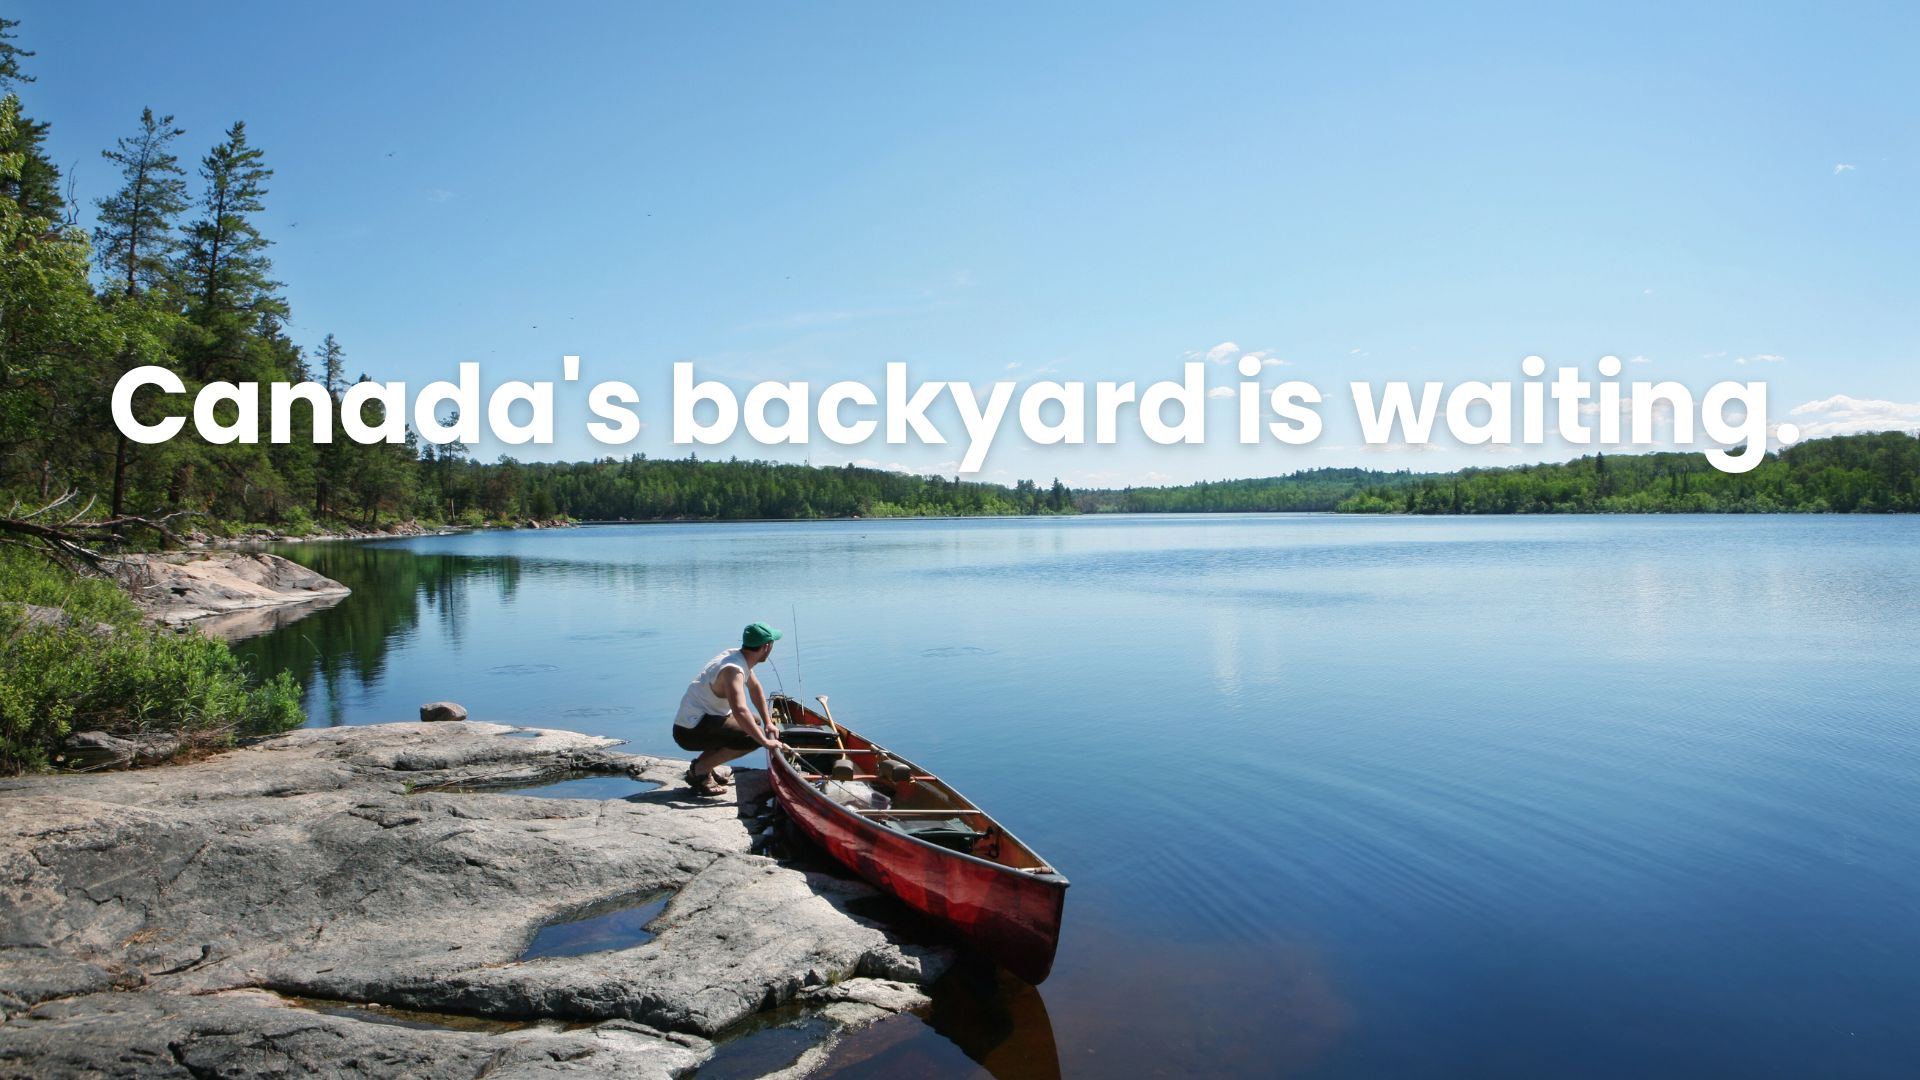 A person stands at the edge of the Canadian shield by a canoe, looking out onto a lake.